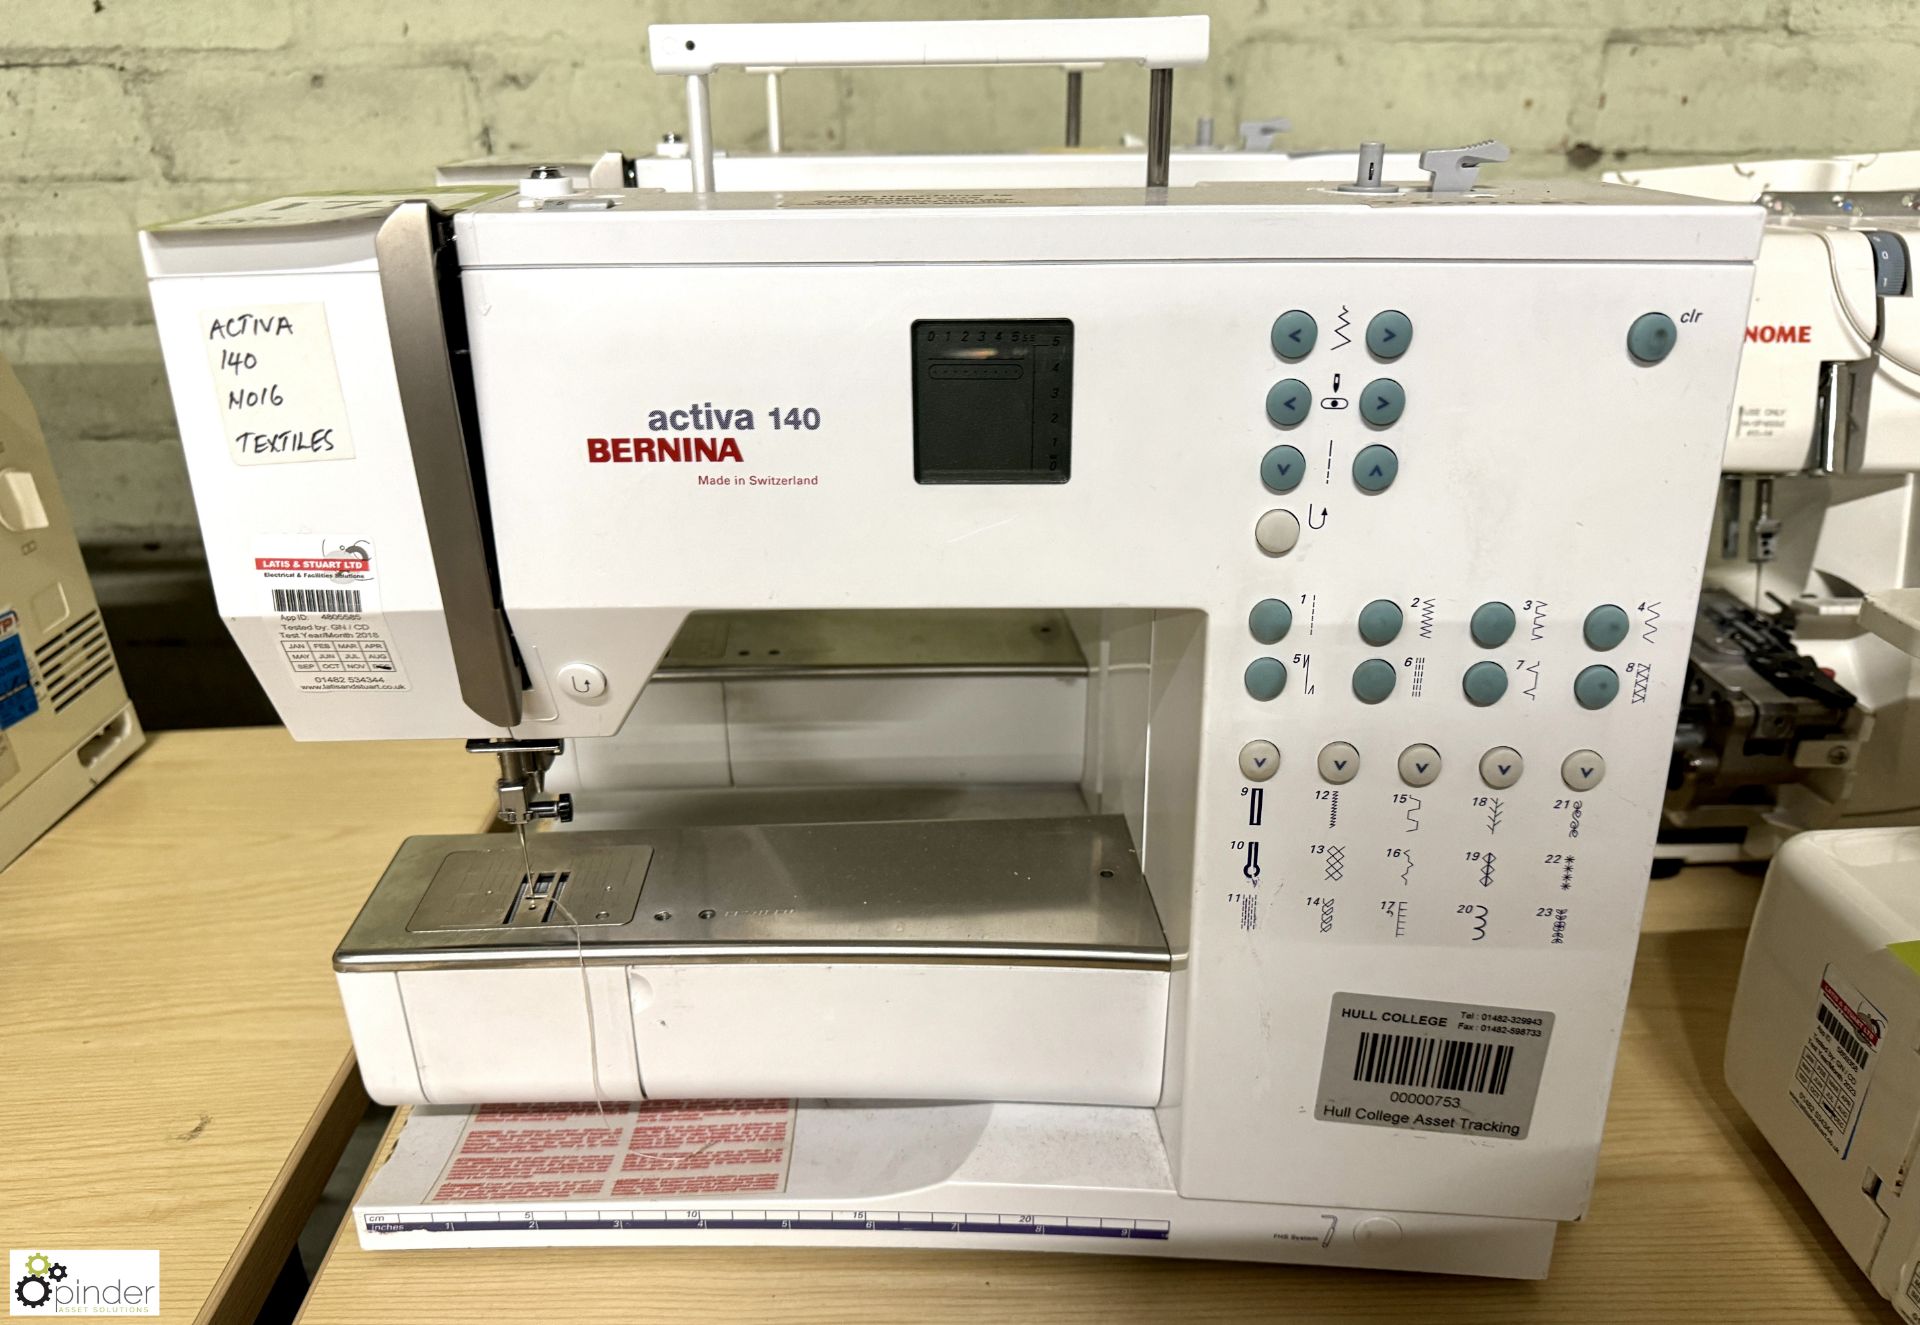 Bermina Activa 140 Programmable Domestic Lockstitch Sewing Machine, 240volts (no power leads or foot